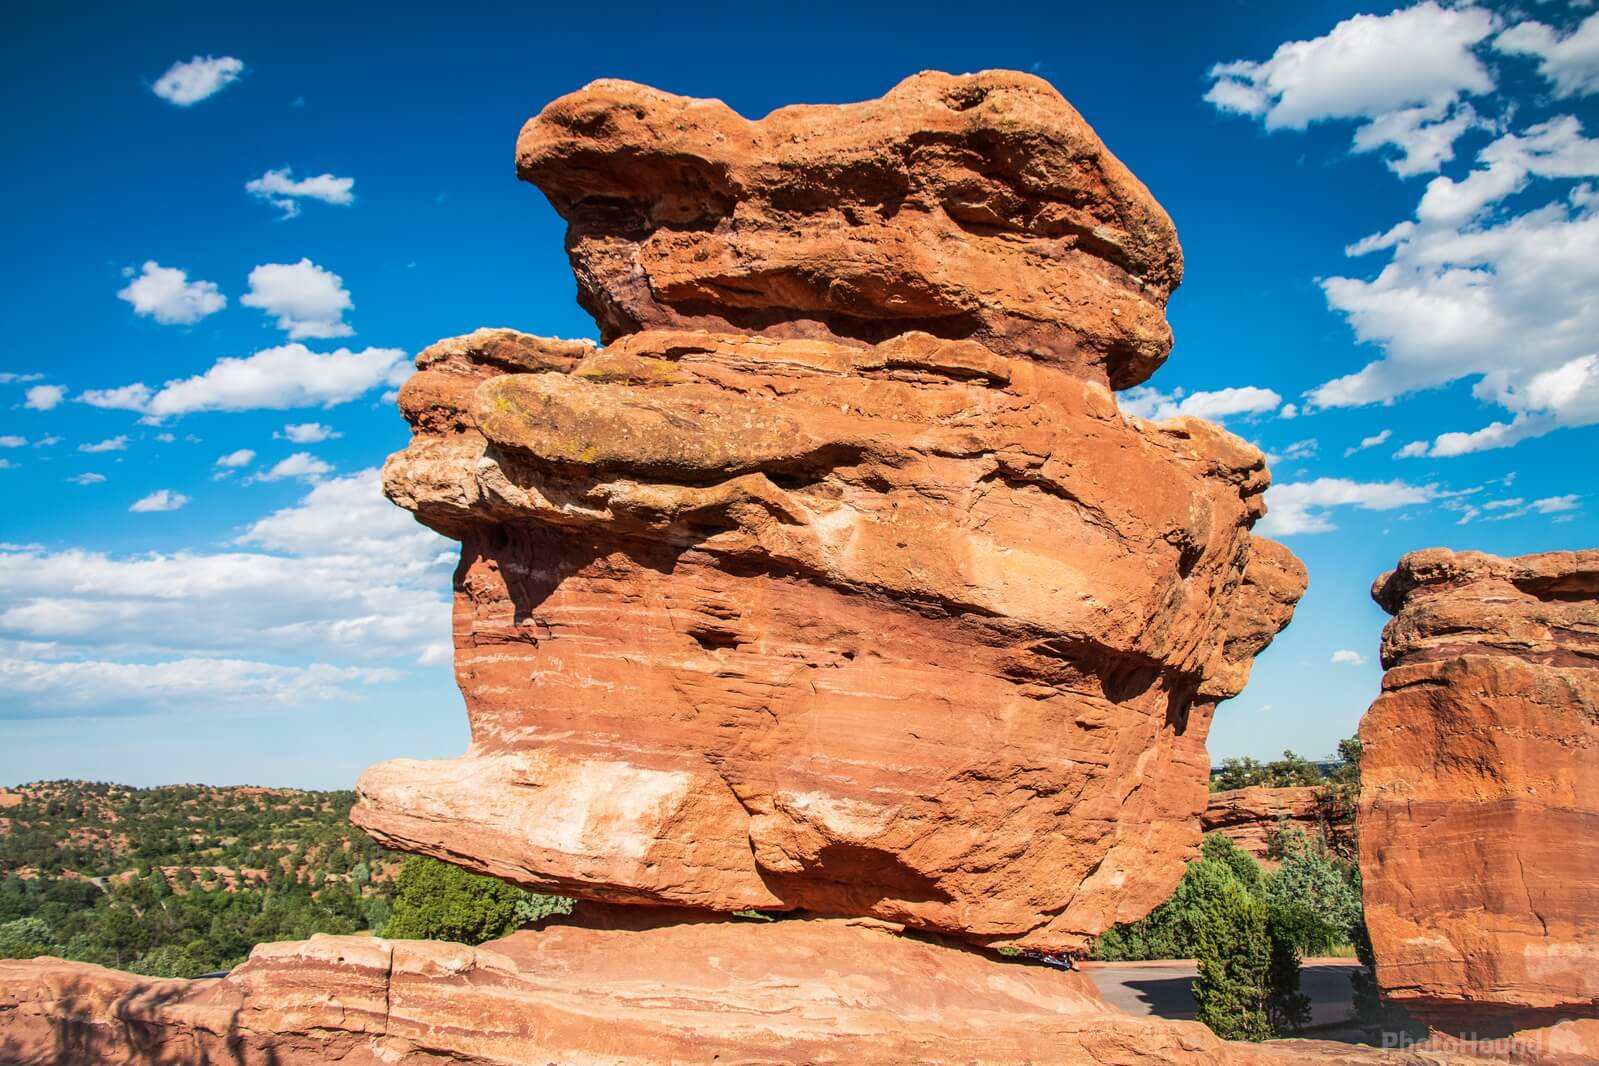 Image of Garden of the Gods by Jules Renahan